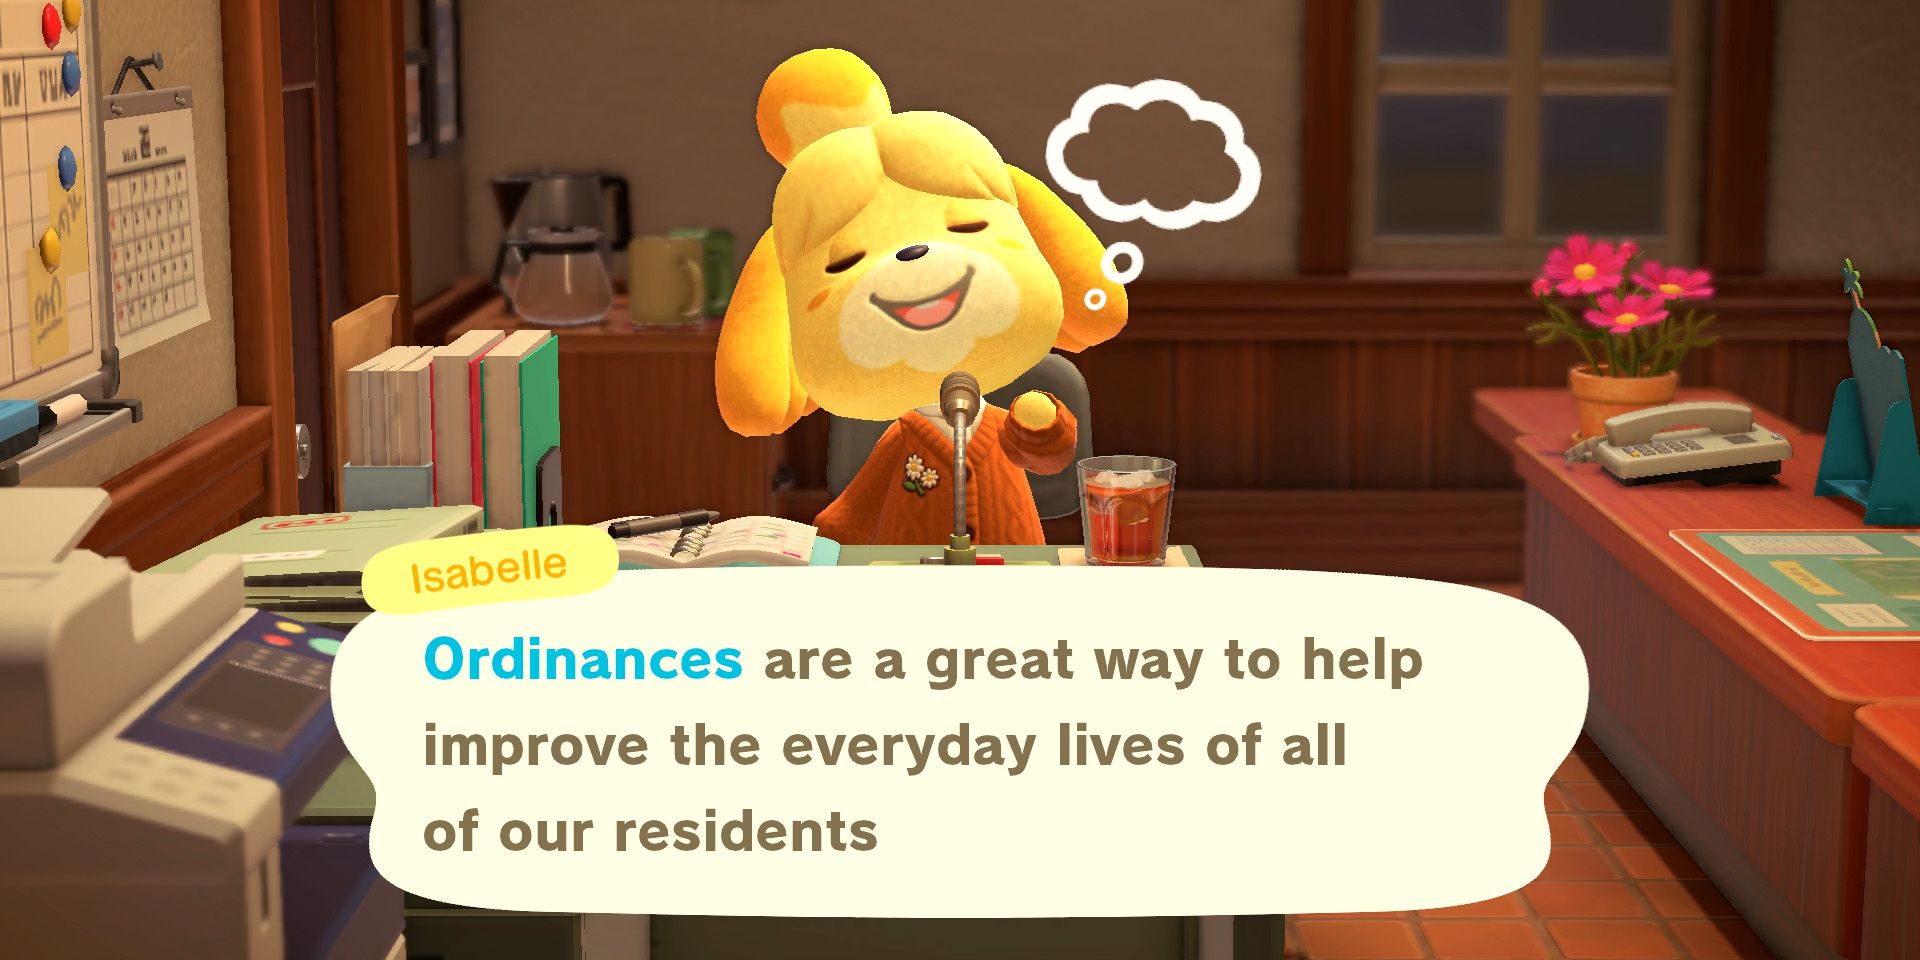 animal-crossing-new-horizons-ordinances-guide-featured-image